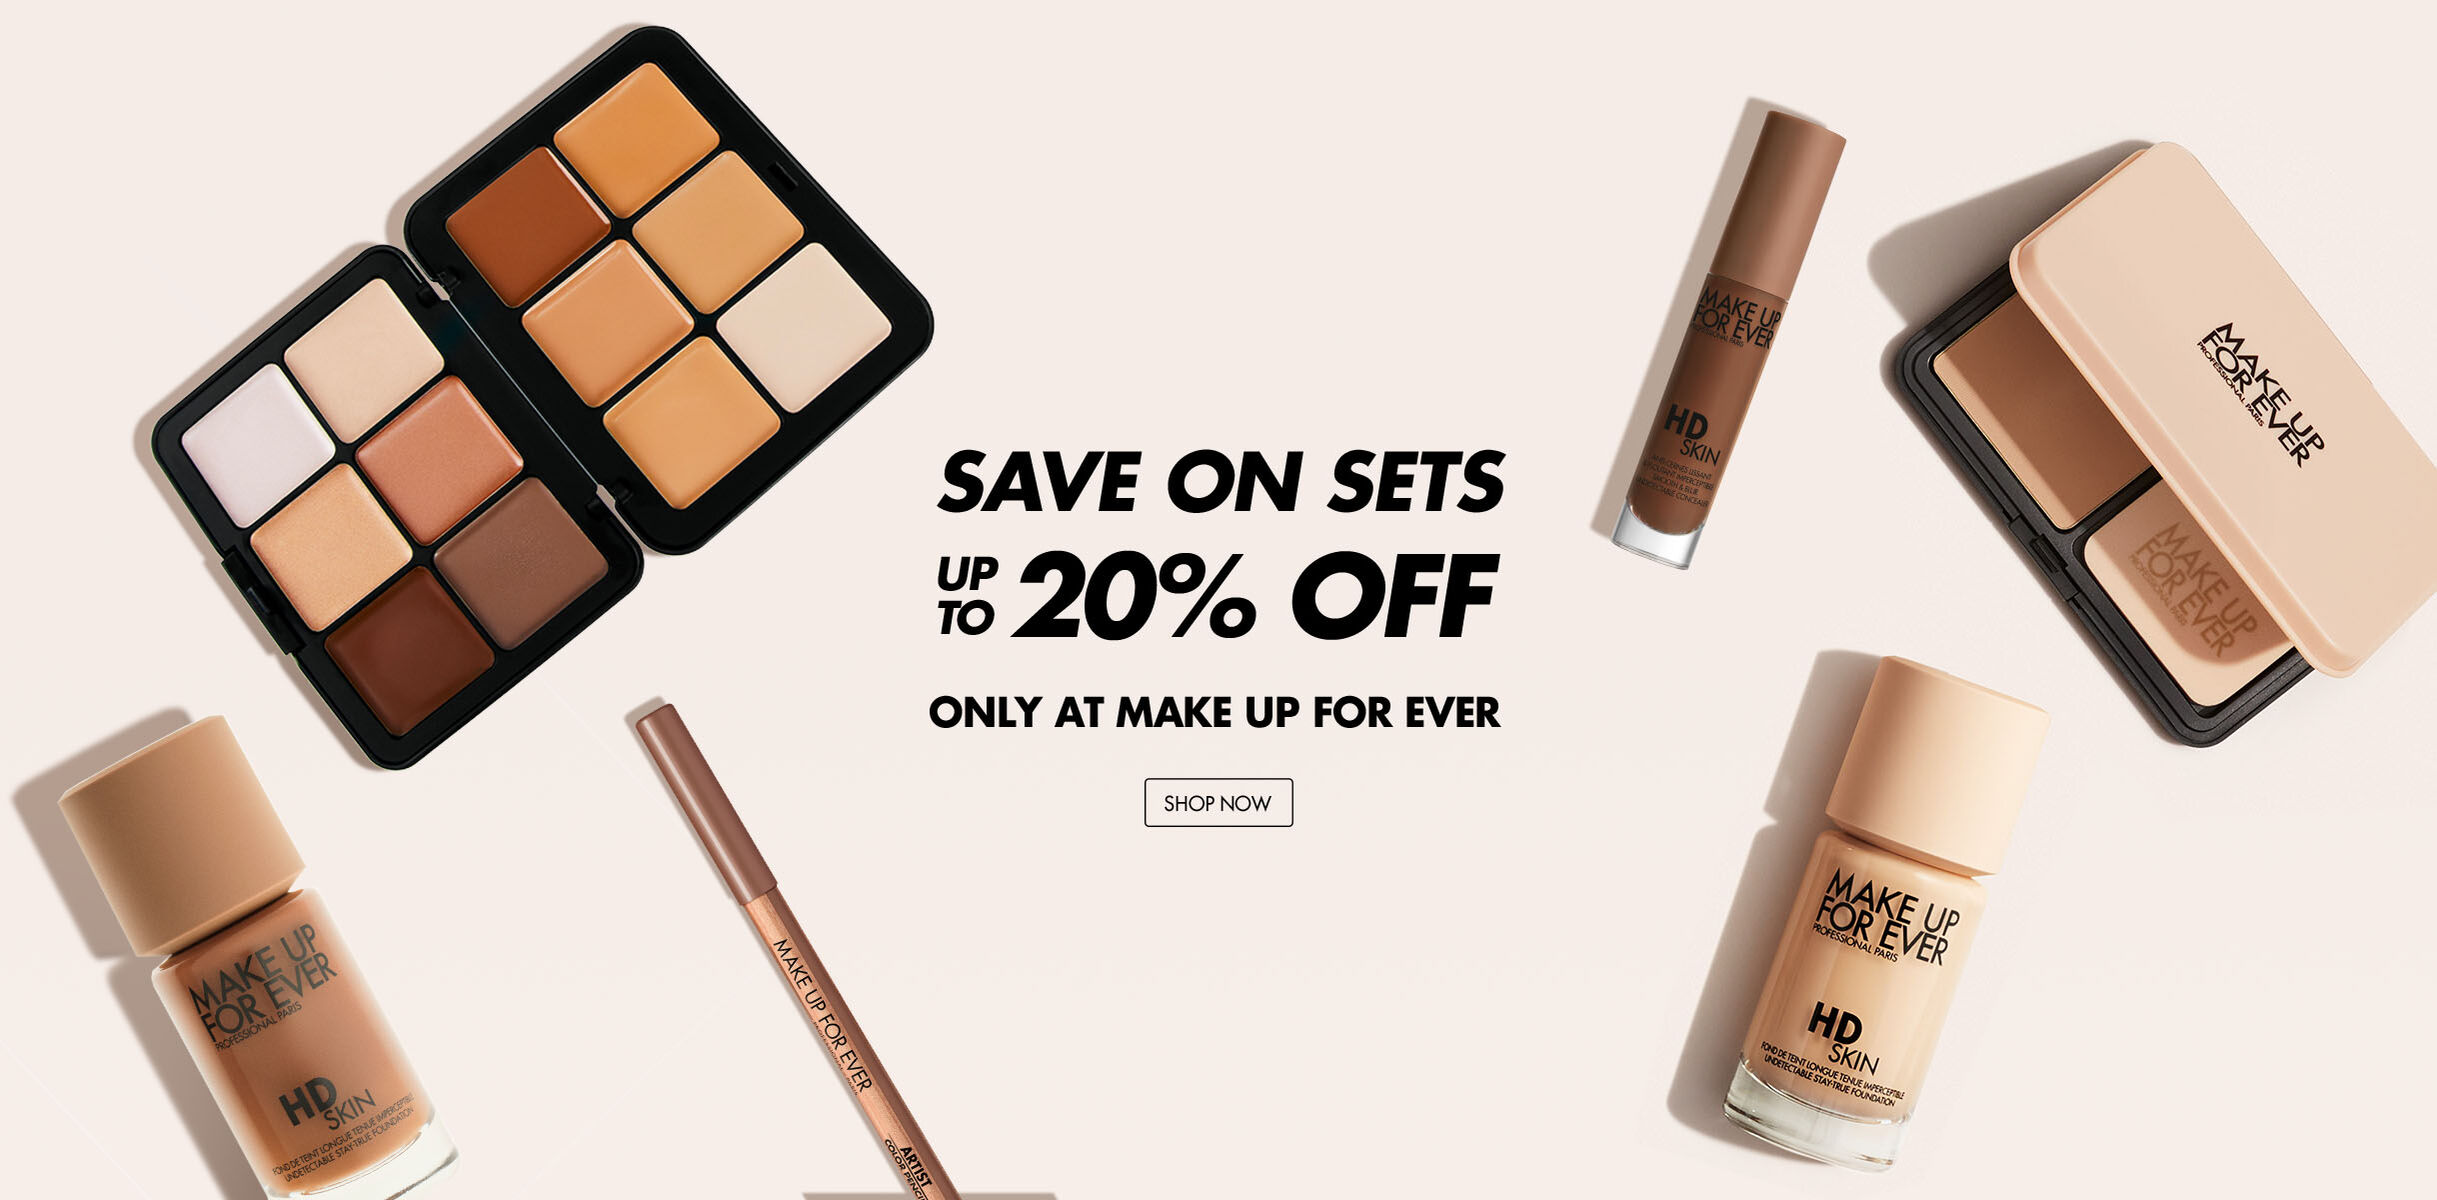 Up For Professional Makeup | Enjoy 15% Your First Order